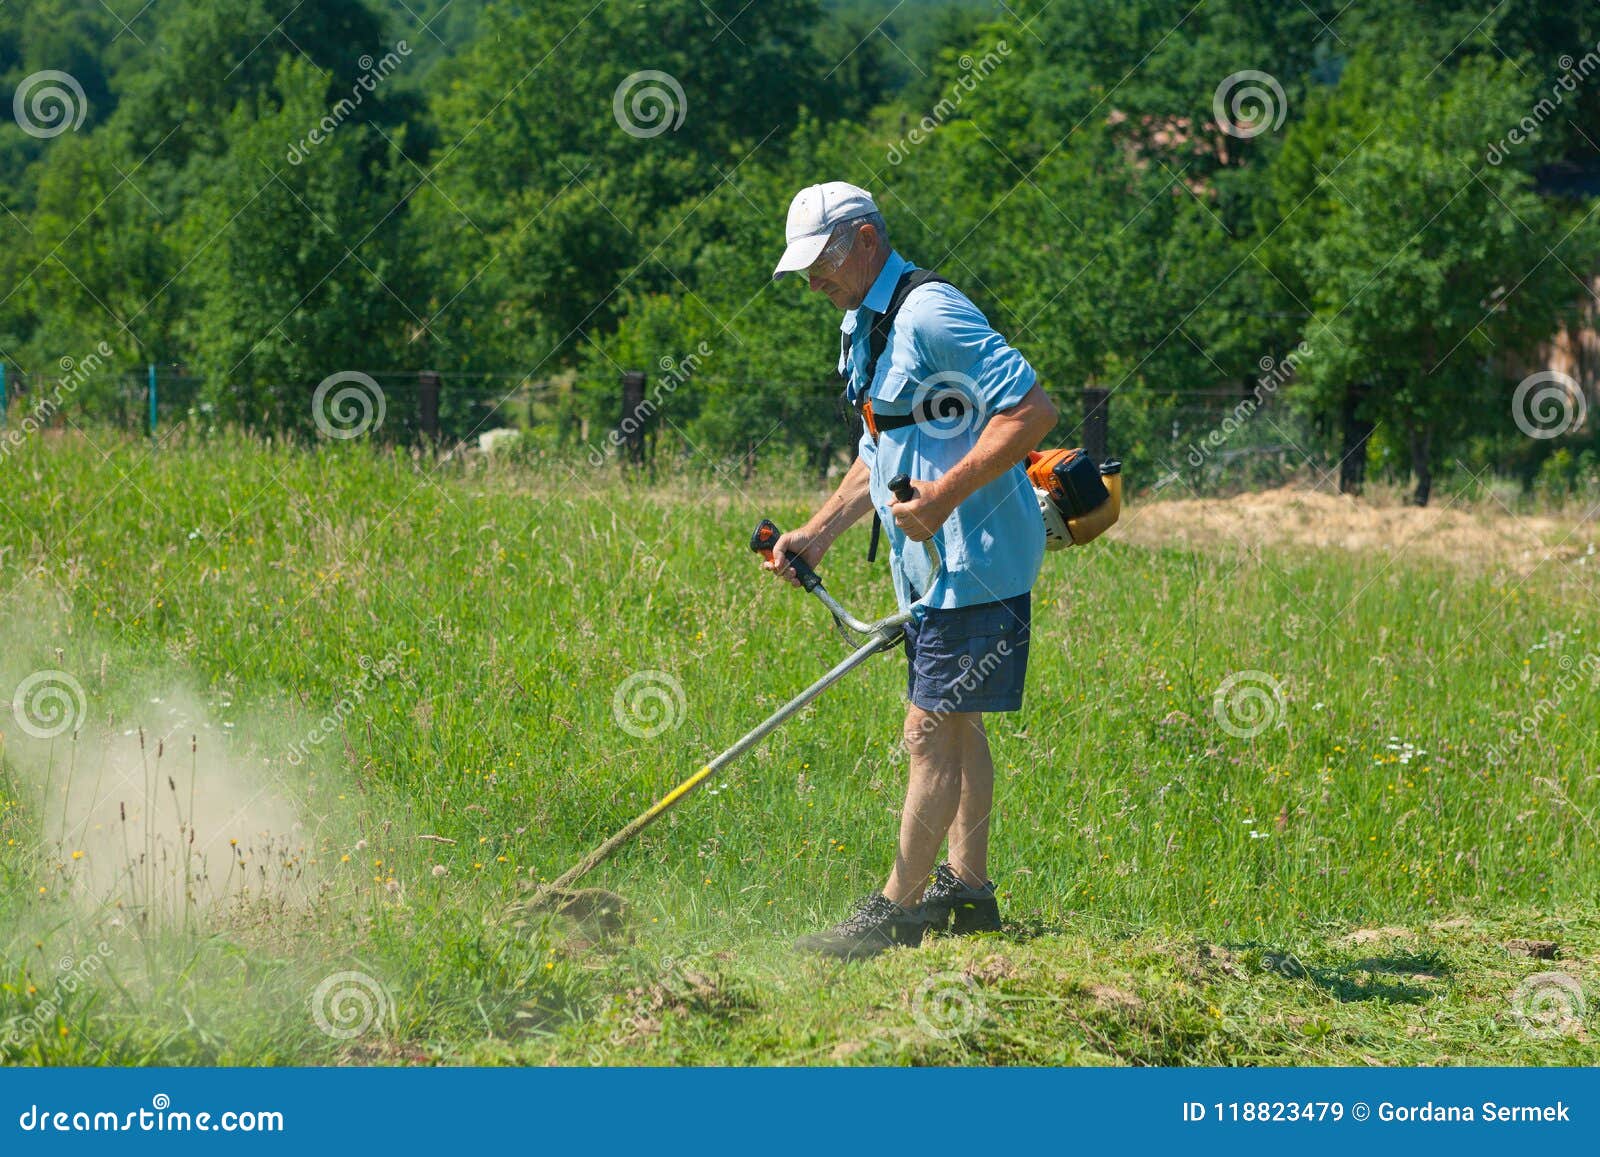 Man Cutting Grass with the Trimmer Stock Image - Image of farmer, belt ...